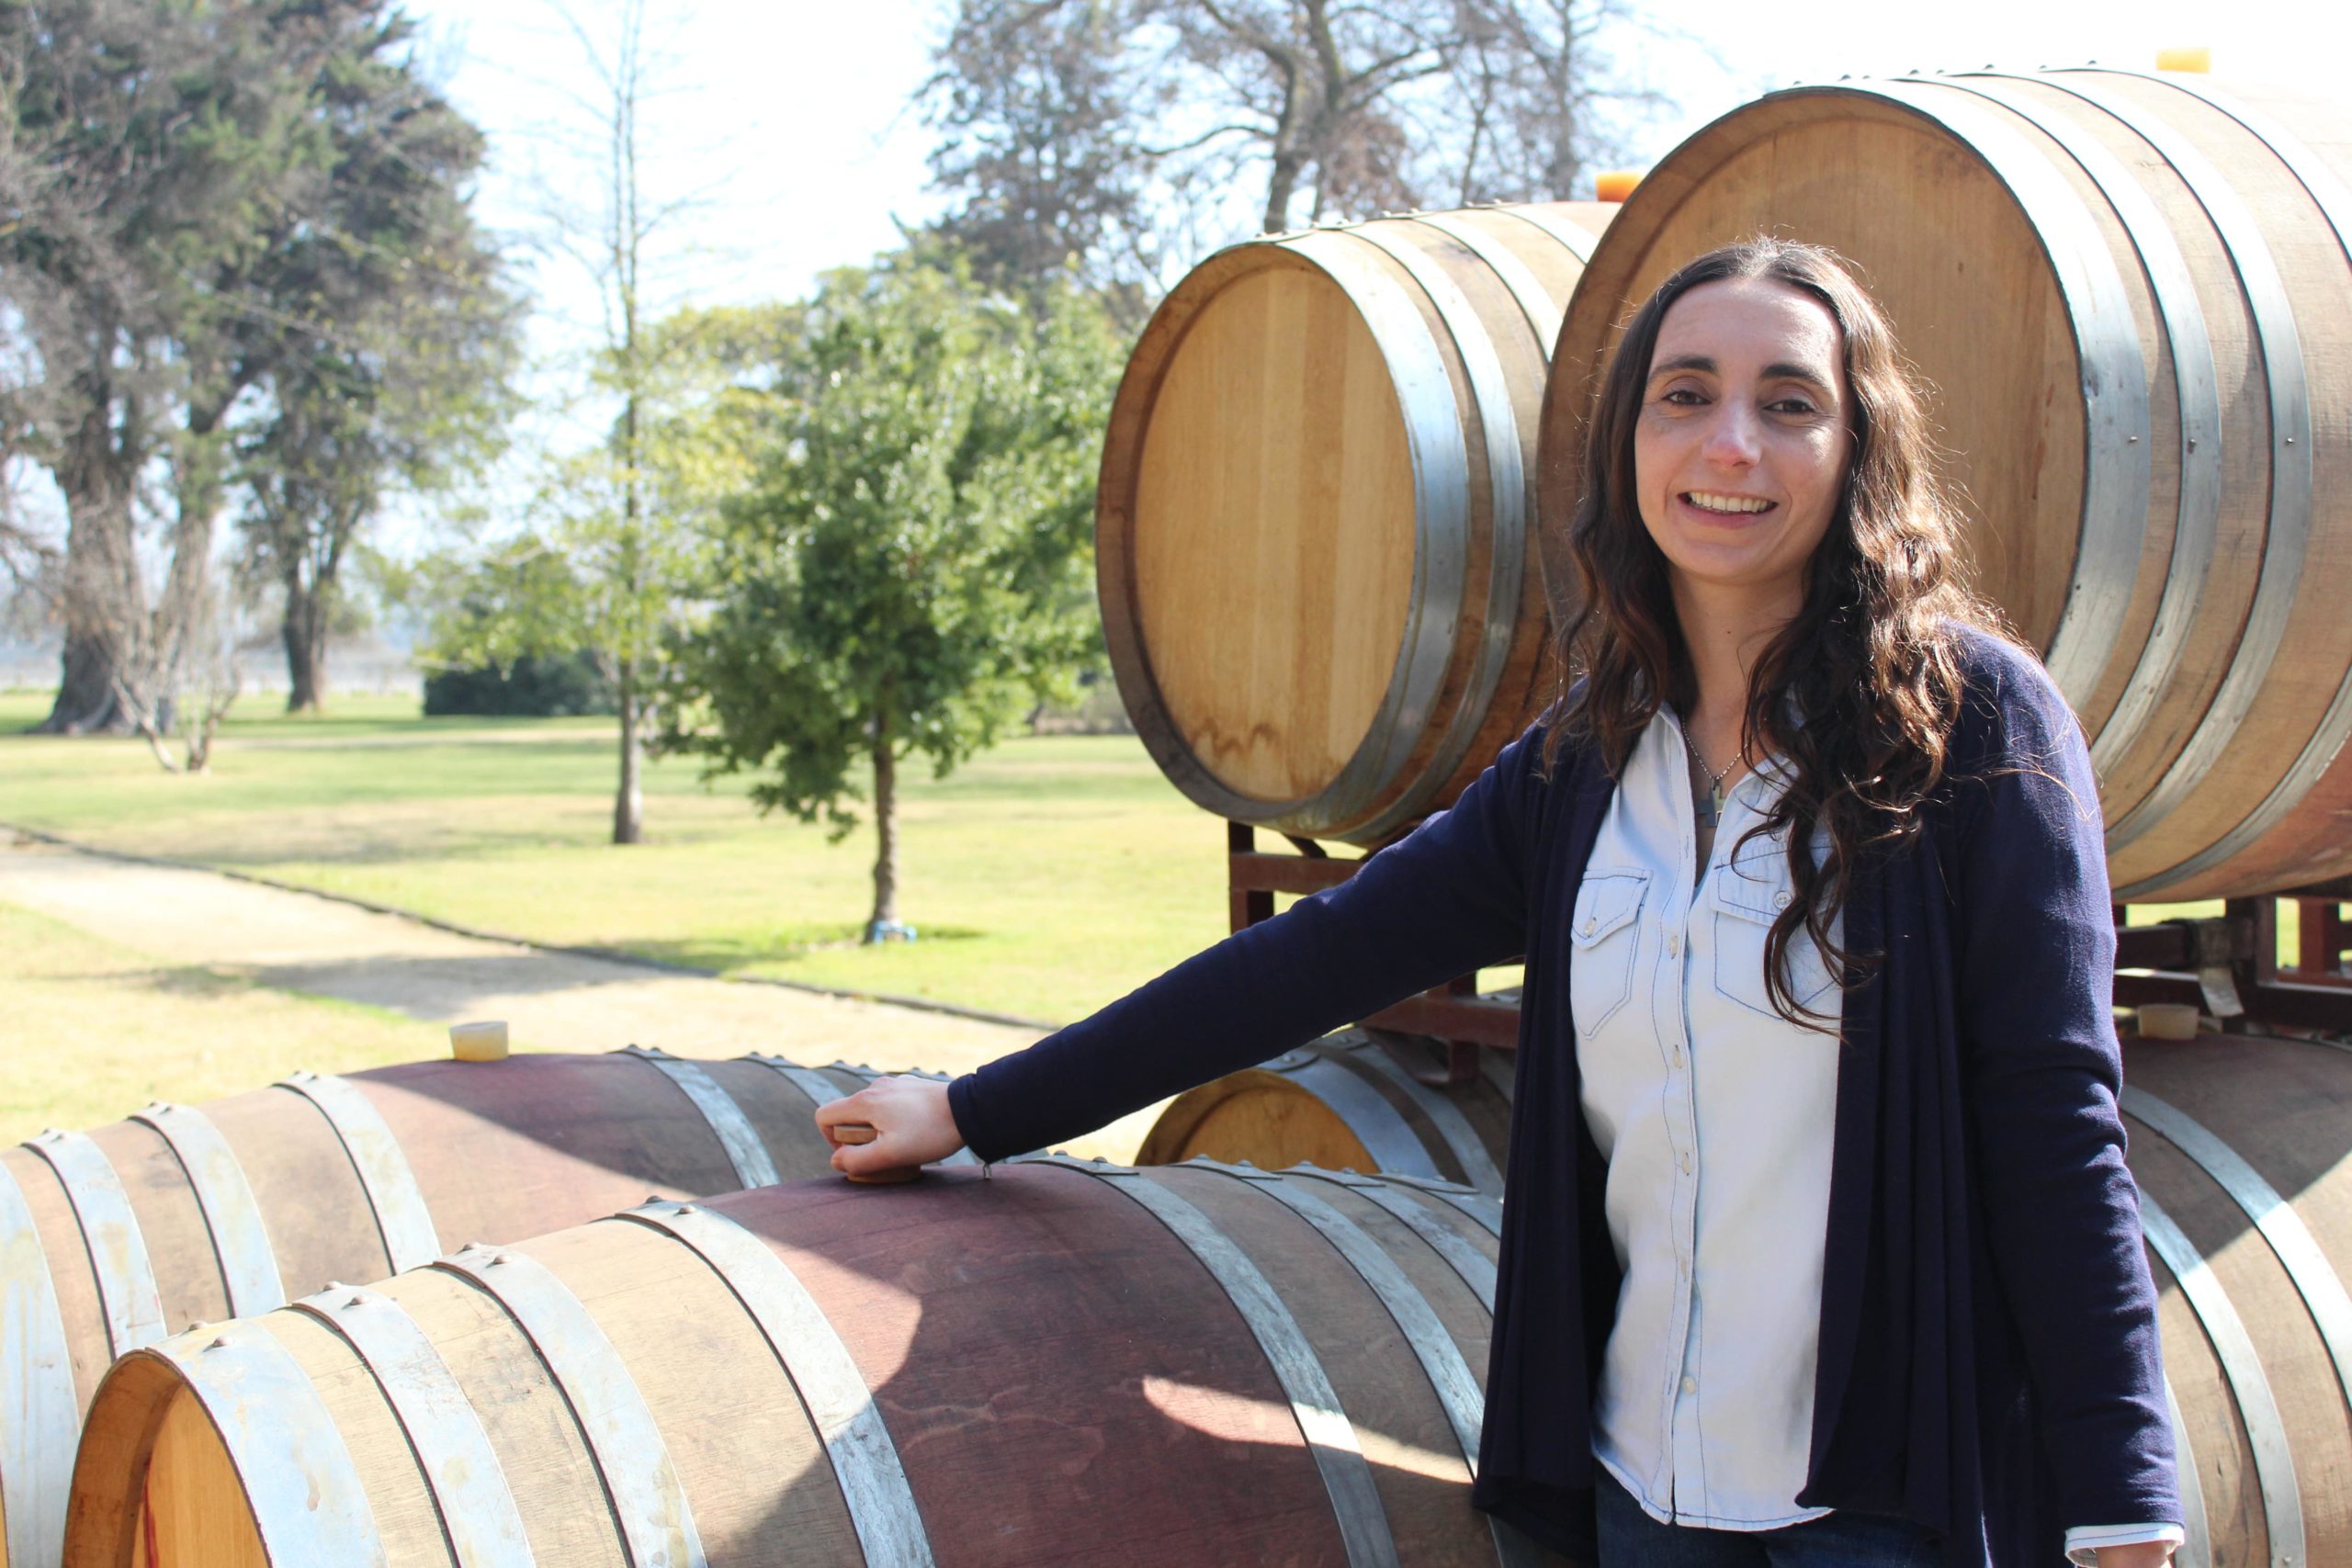 Guide to the wineries in Chile. Pilar Diaz winemaker at Volcanes de Chile winery in Maipo, Chile